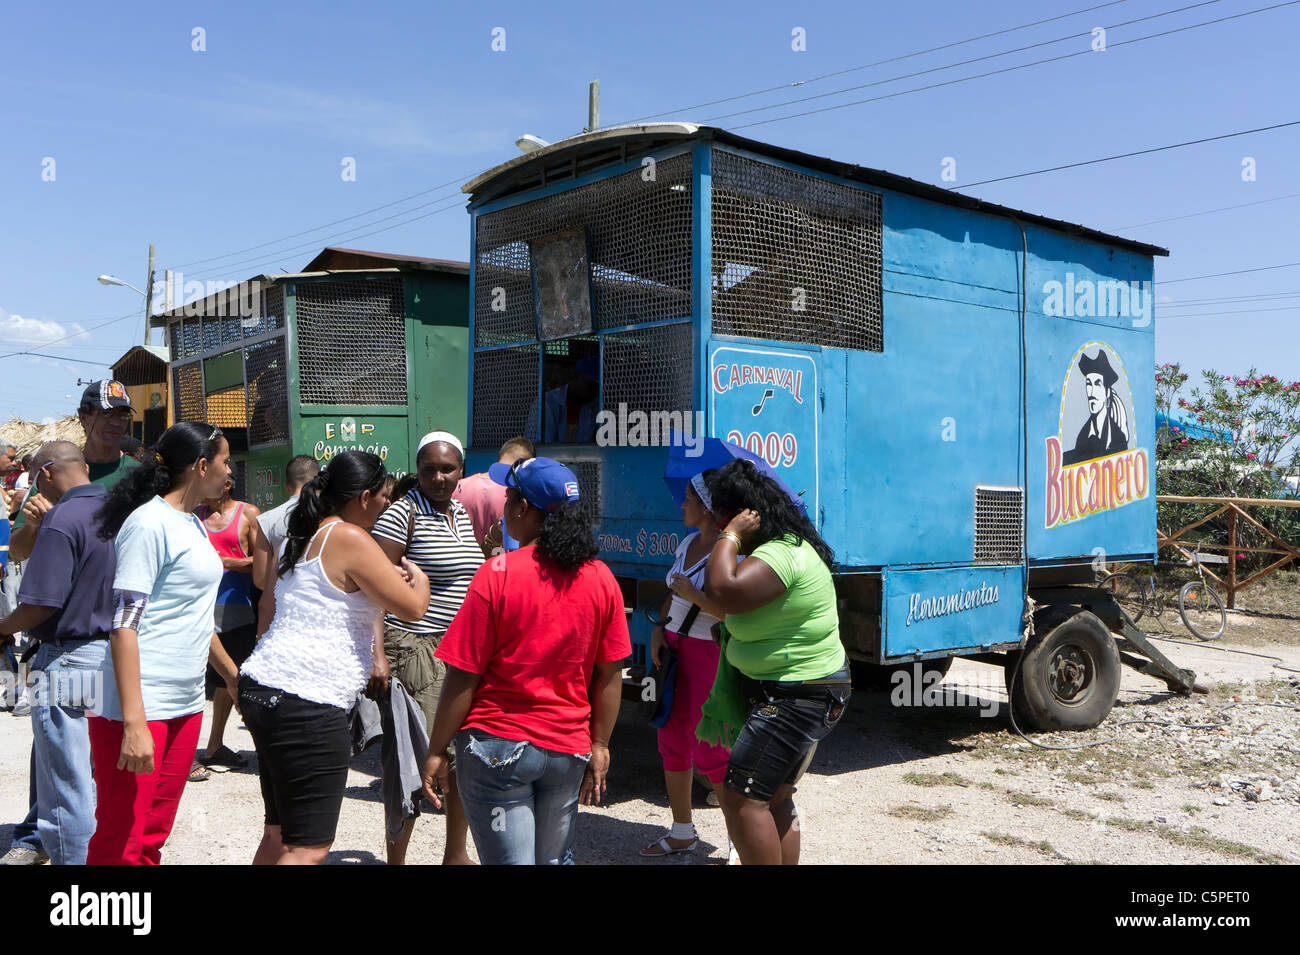 Cubans dancing salsa near a beer truck during all day fiesta to celebrate 50th anniversary of Bay of Pigs victory, Playa Giron Stock Photo